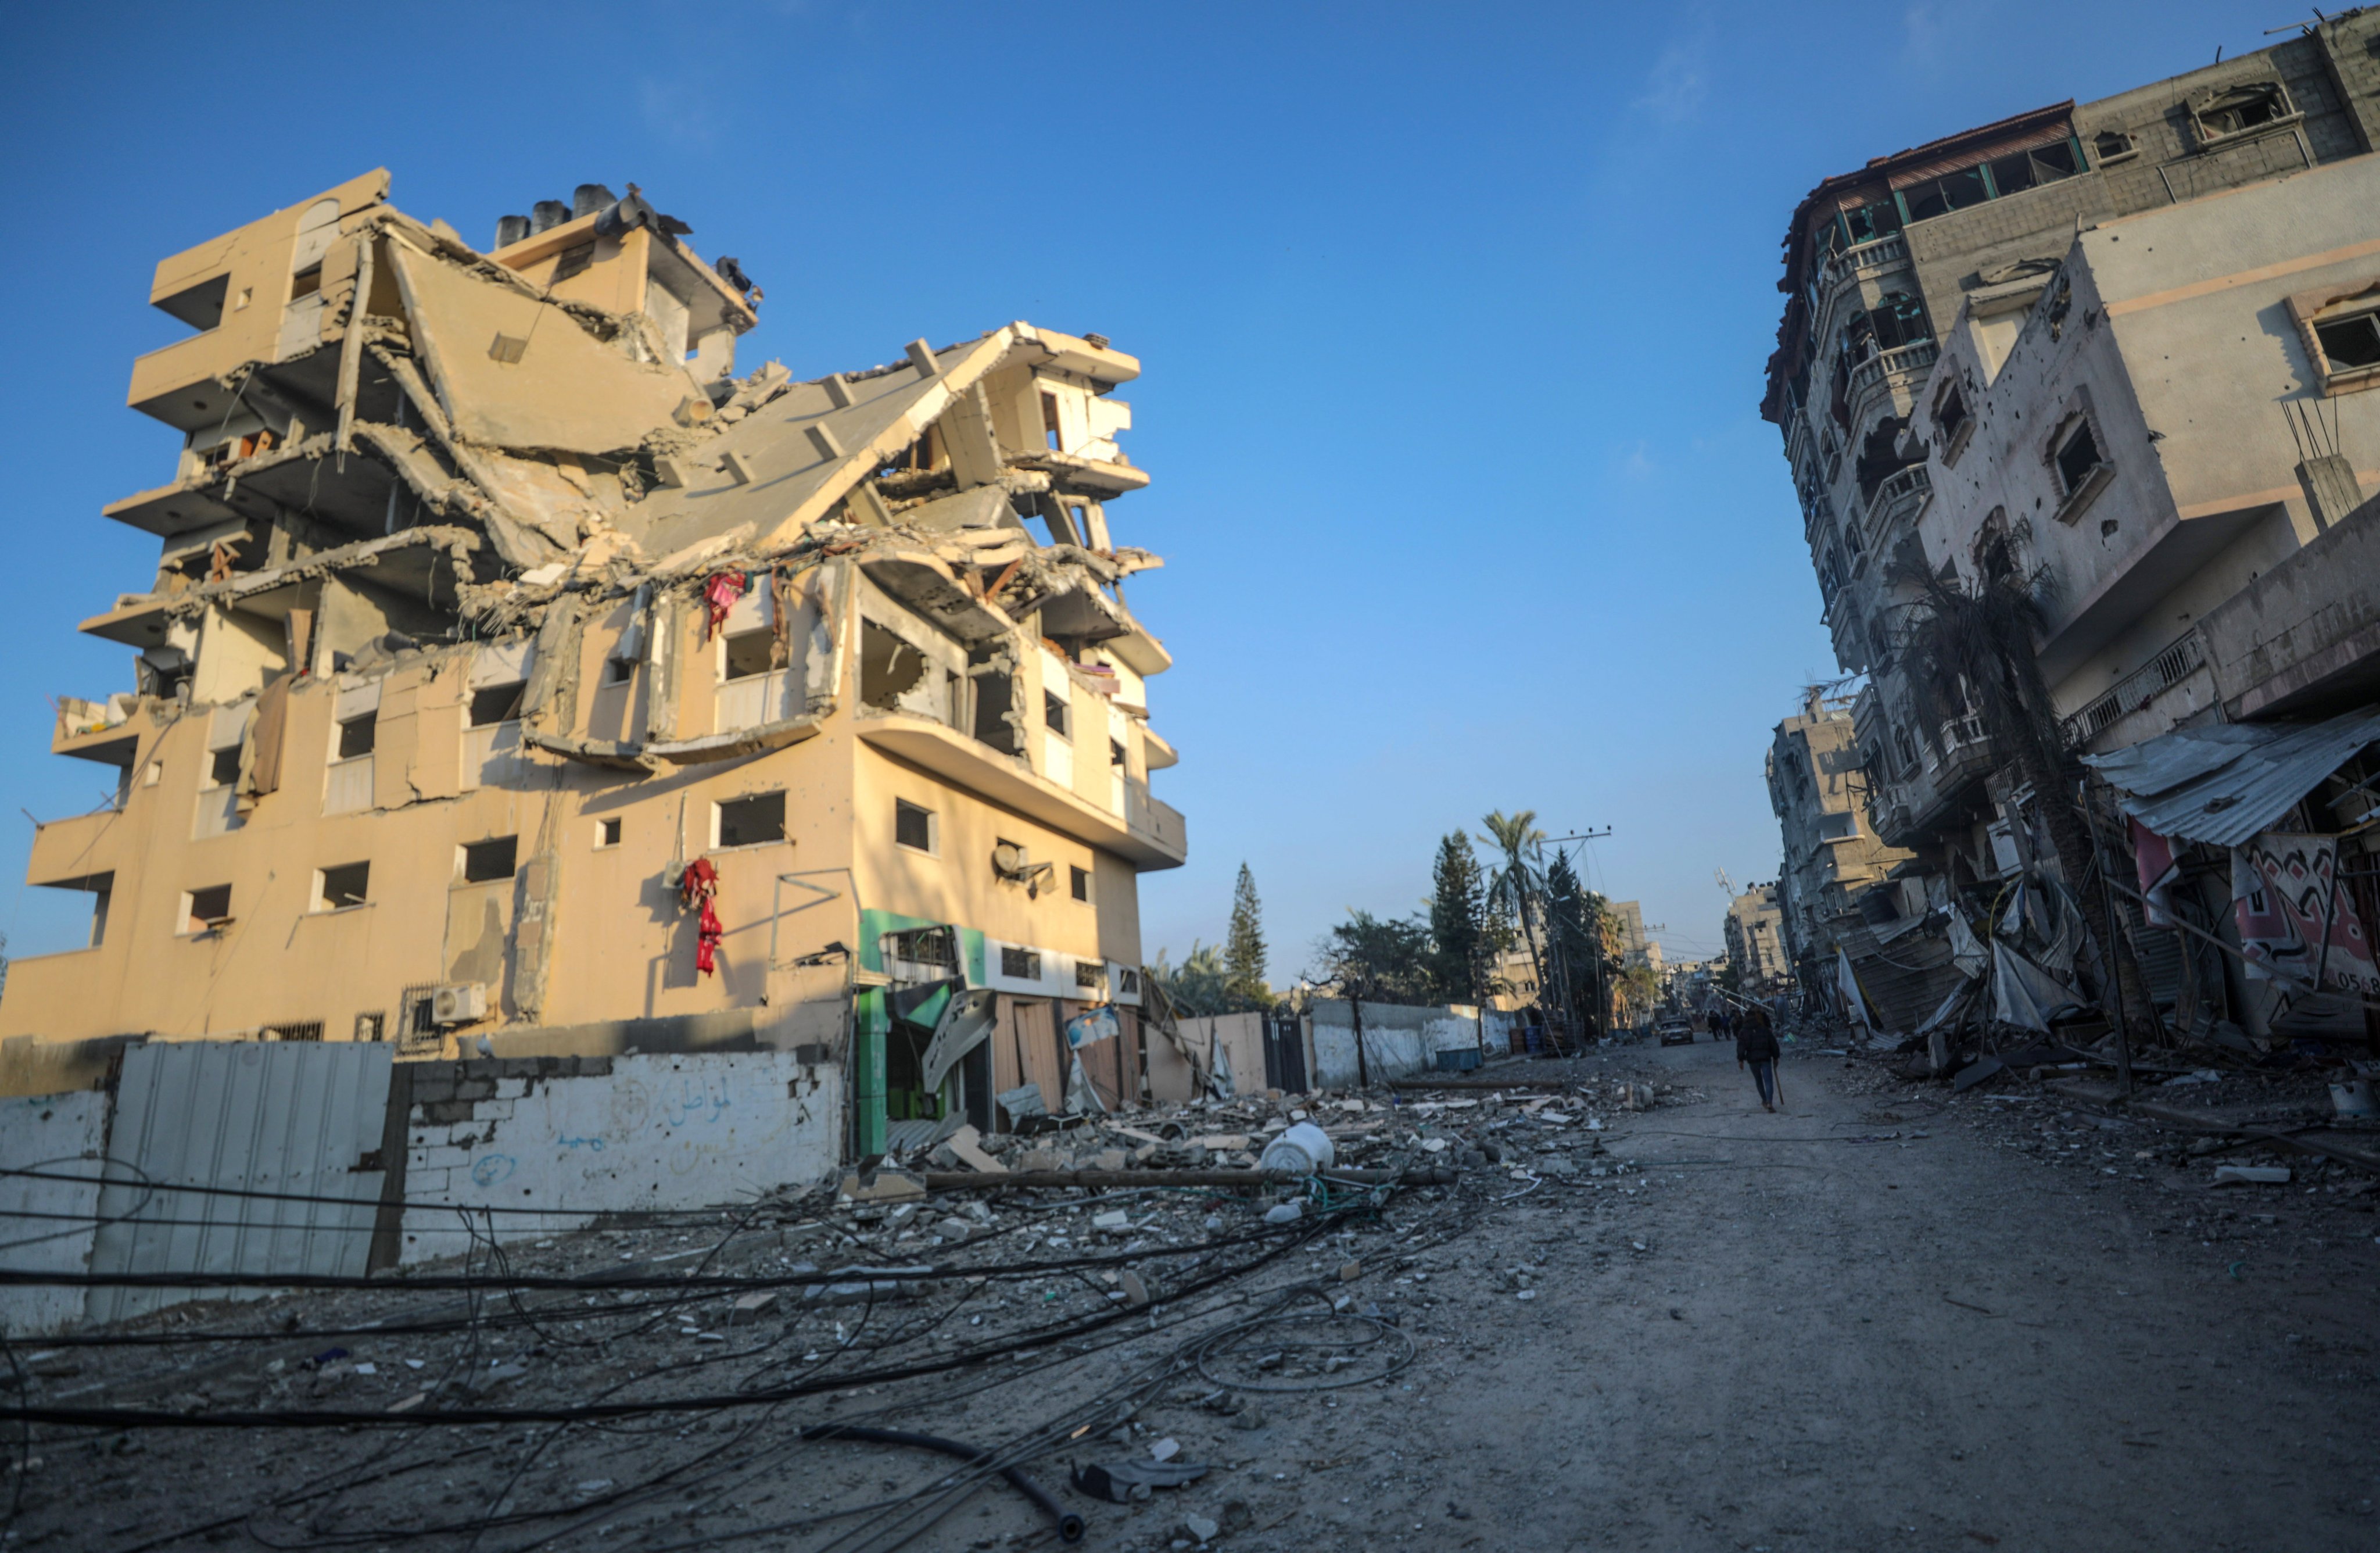 Damaged buildings are seen in Al-Maghazi refugee camp in southern Gaza on Friday. Photo: EPA-EFE